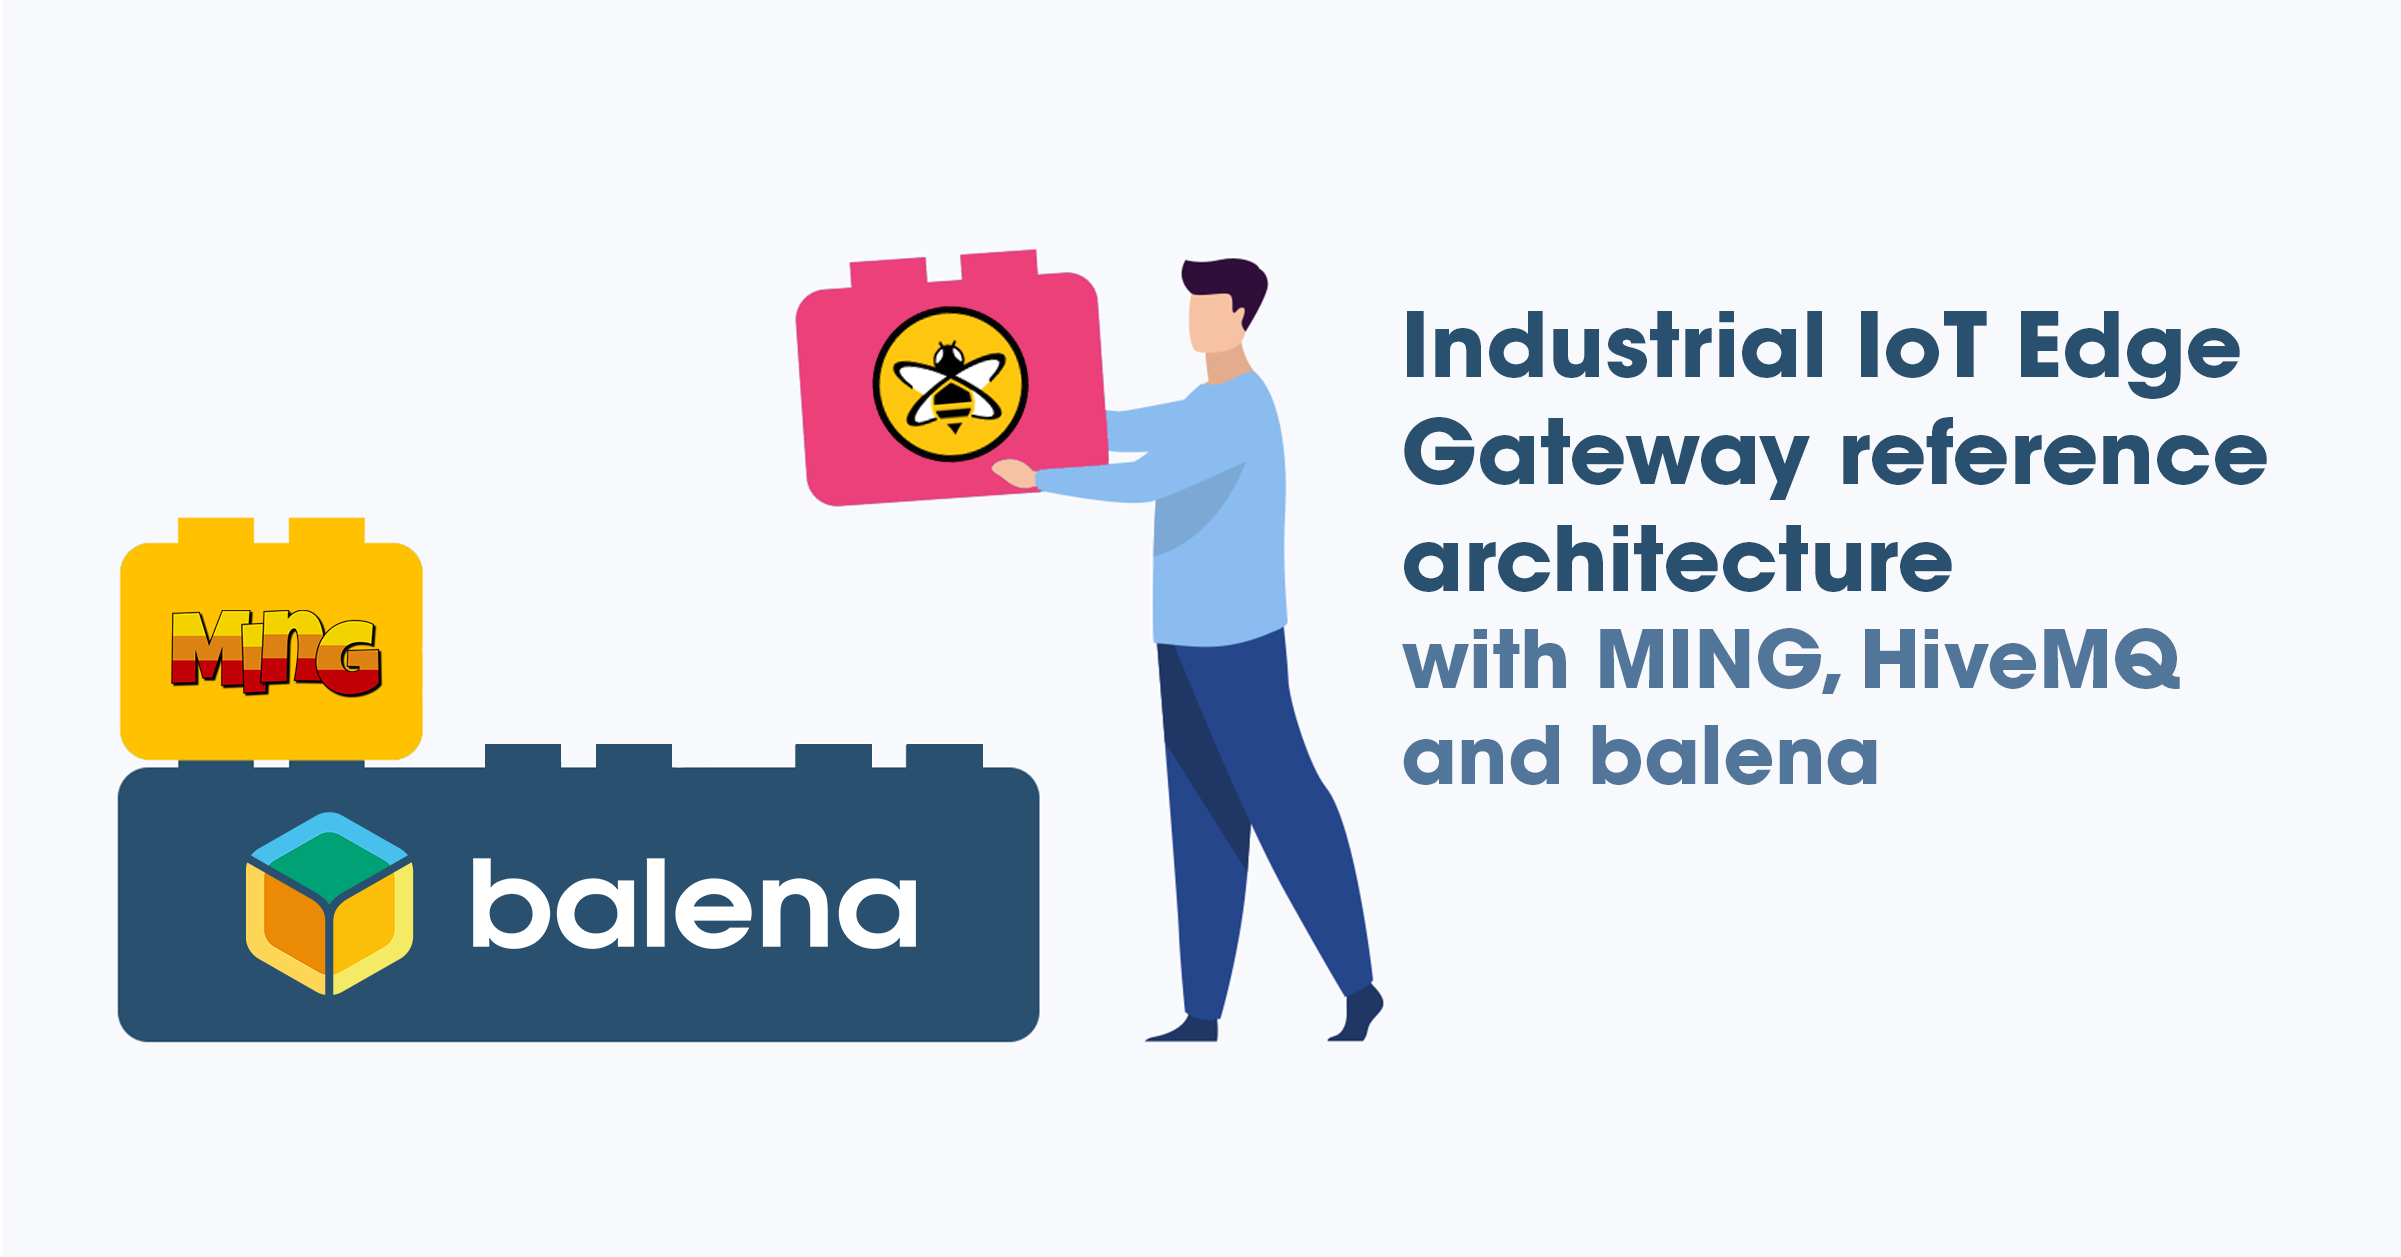 Industrial IoT Edge Gateway reference architecture using MING with HiveMQ and balena